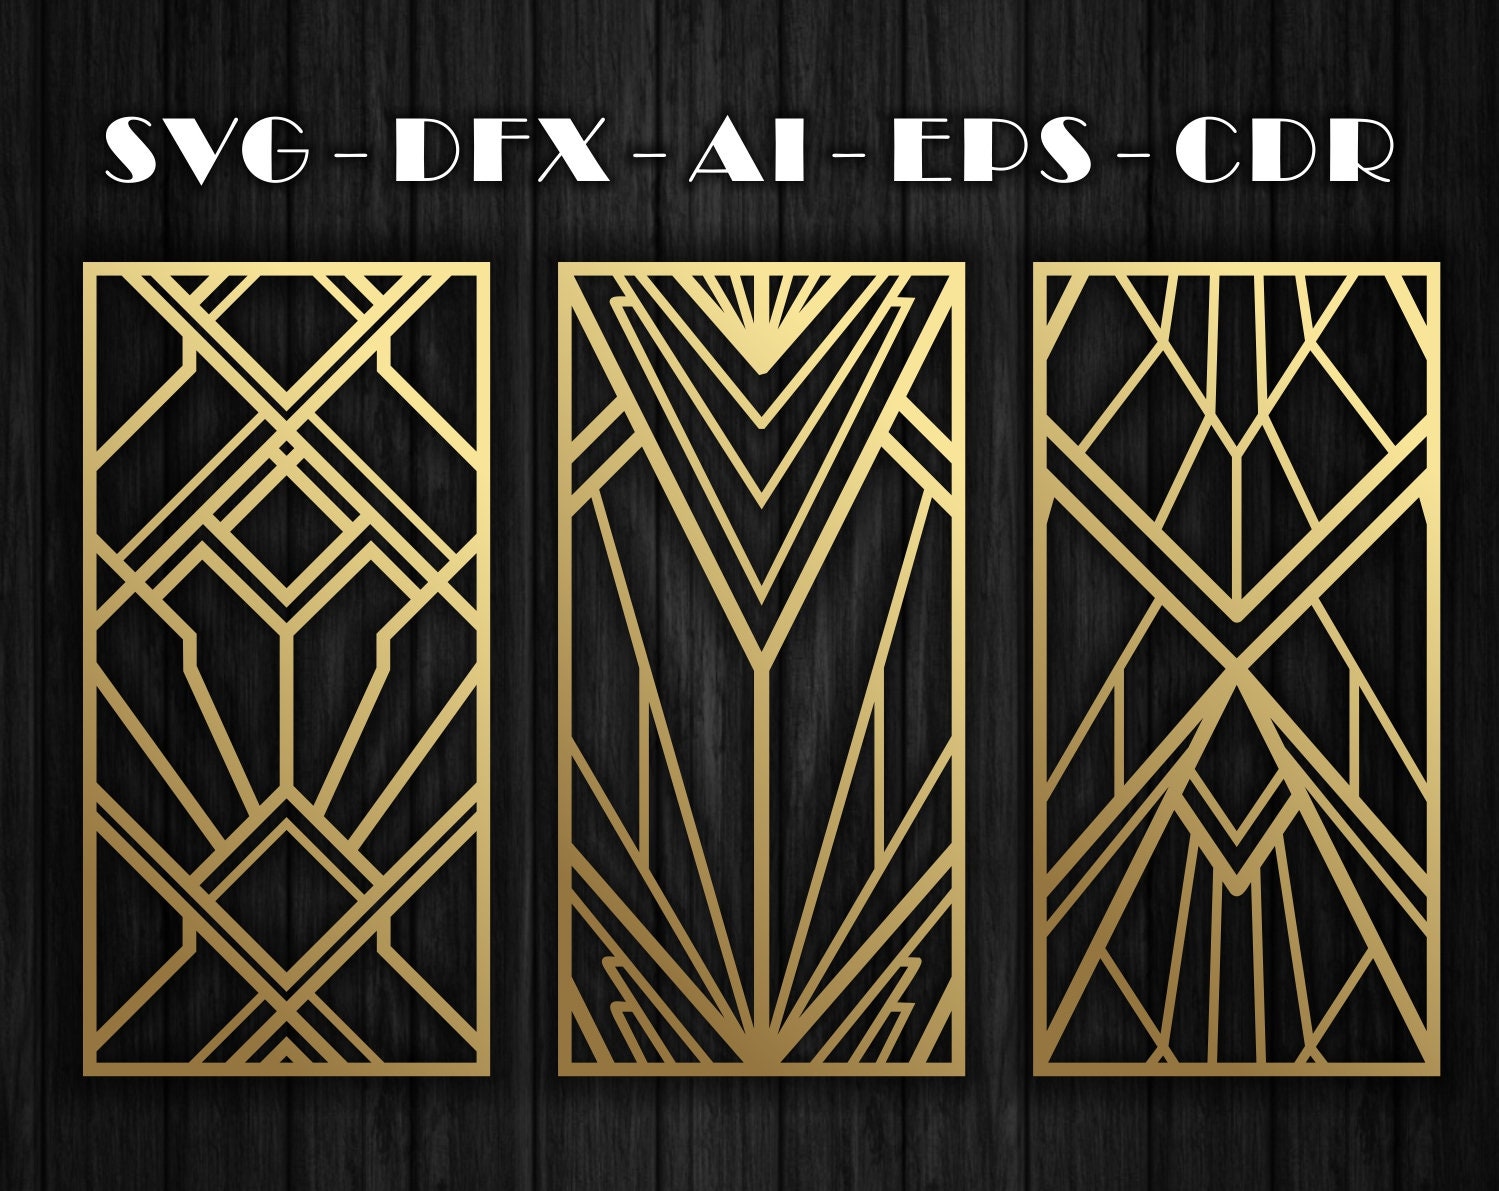 24 Patterns of Art Deco for Decorative Panel, Art Deco Wall Art CNC Laser  Cutting File Dxf, Svg, Jpg, Cdr, Eps Vector Files. 